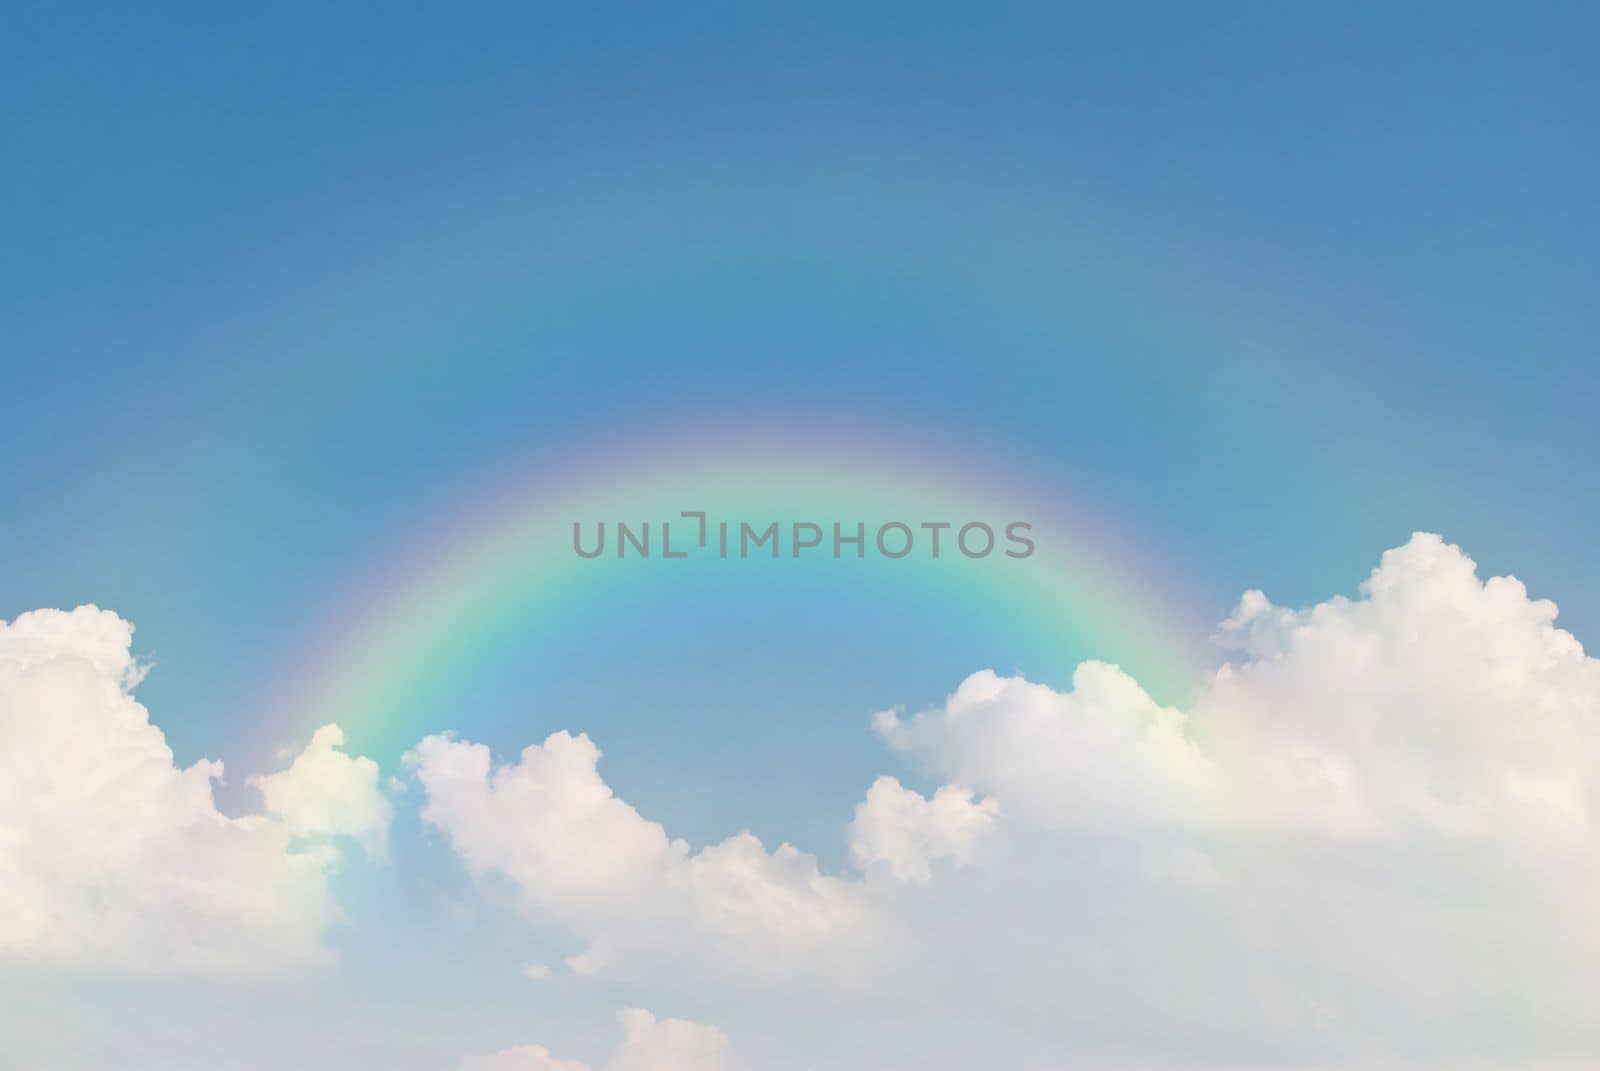 image of rainbow in blue sky and white clouds by rakoptonLPN